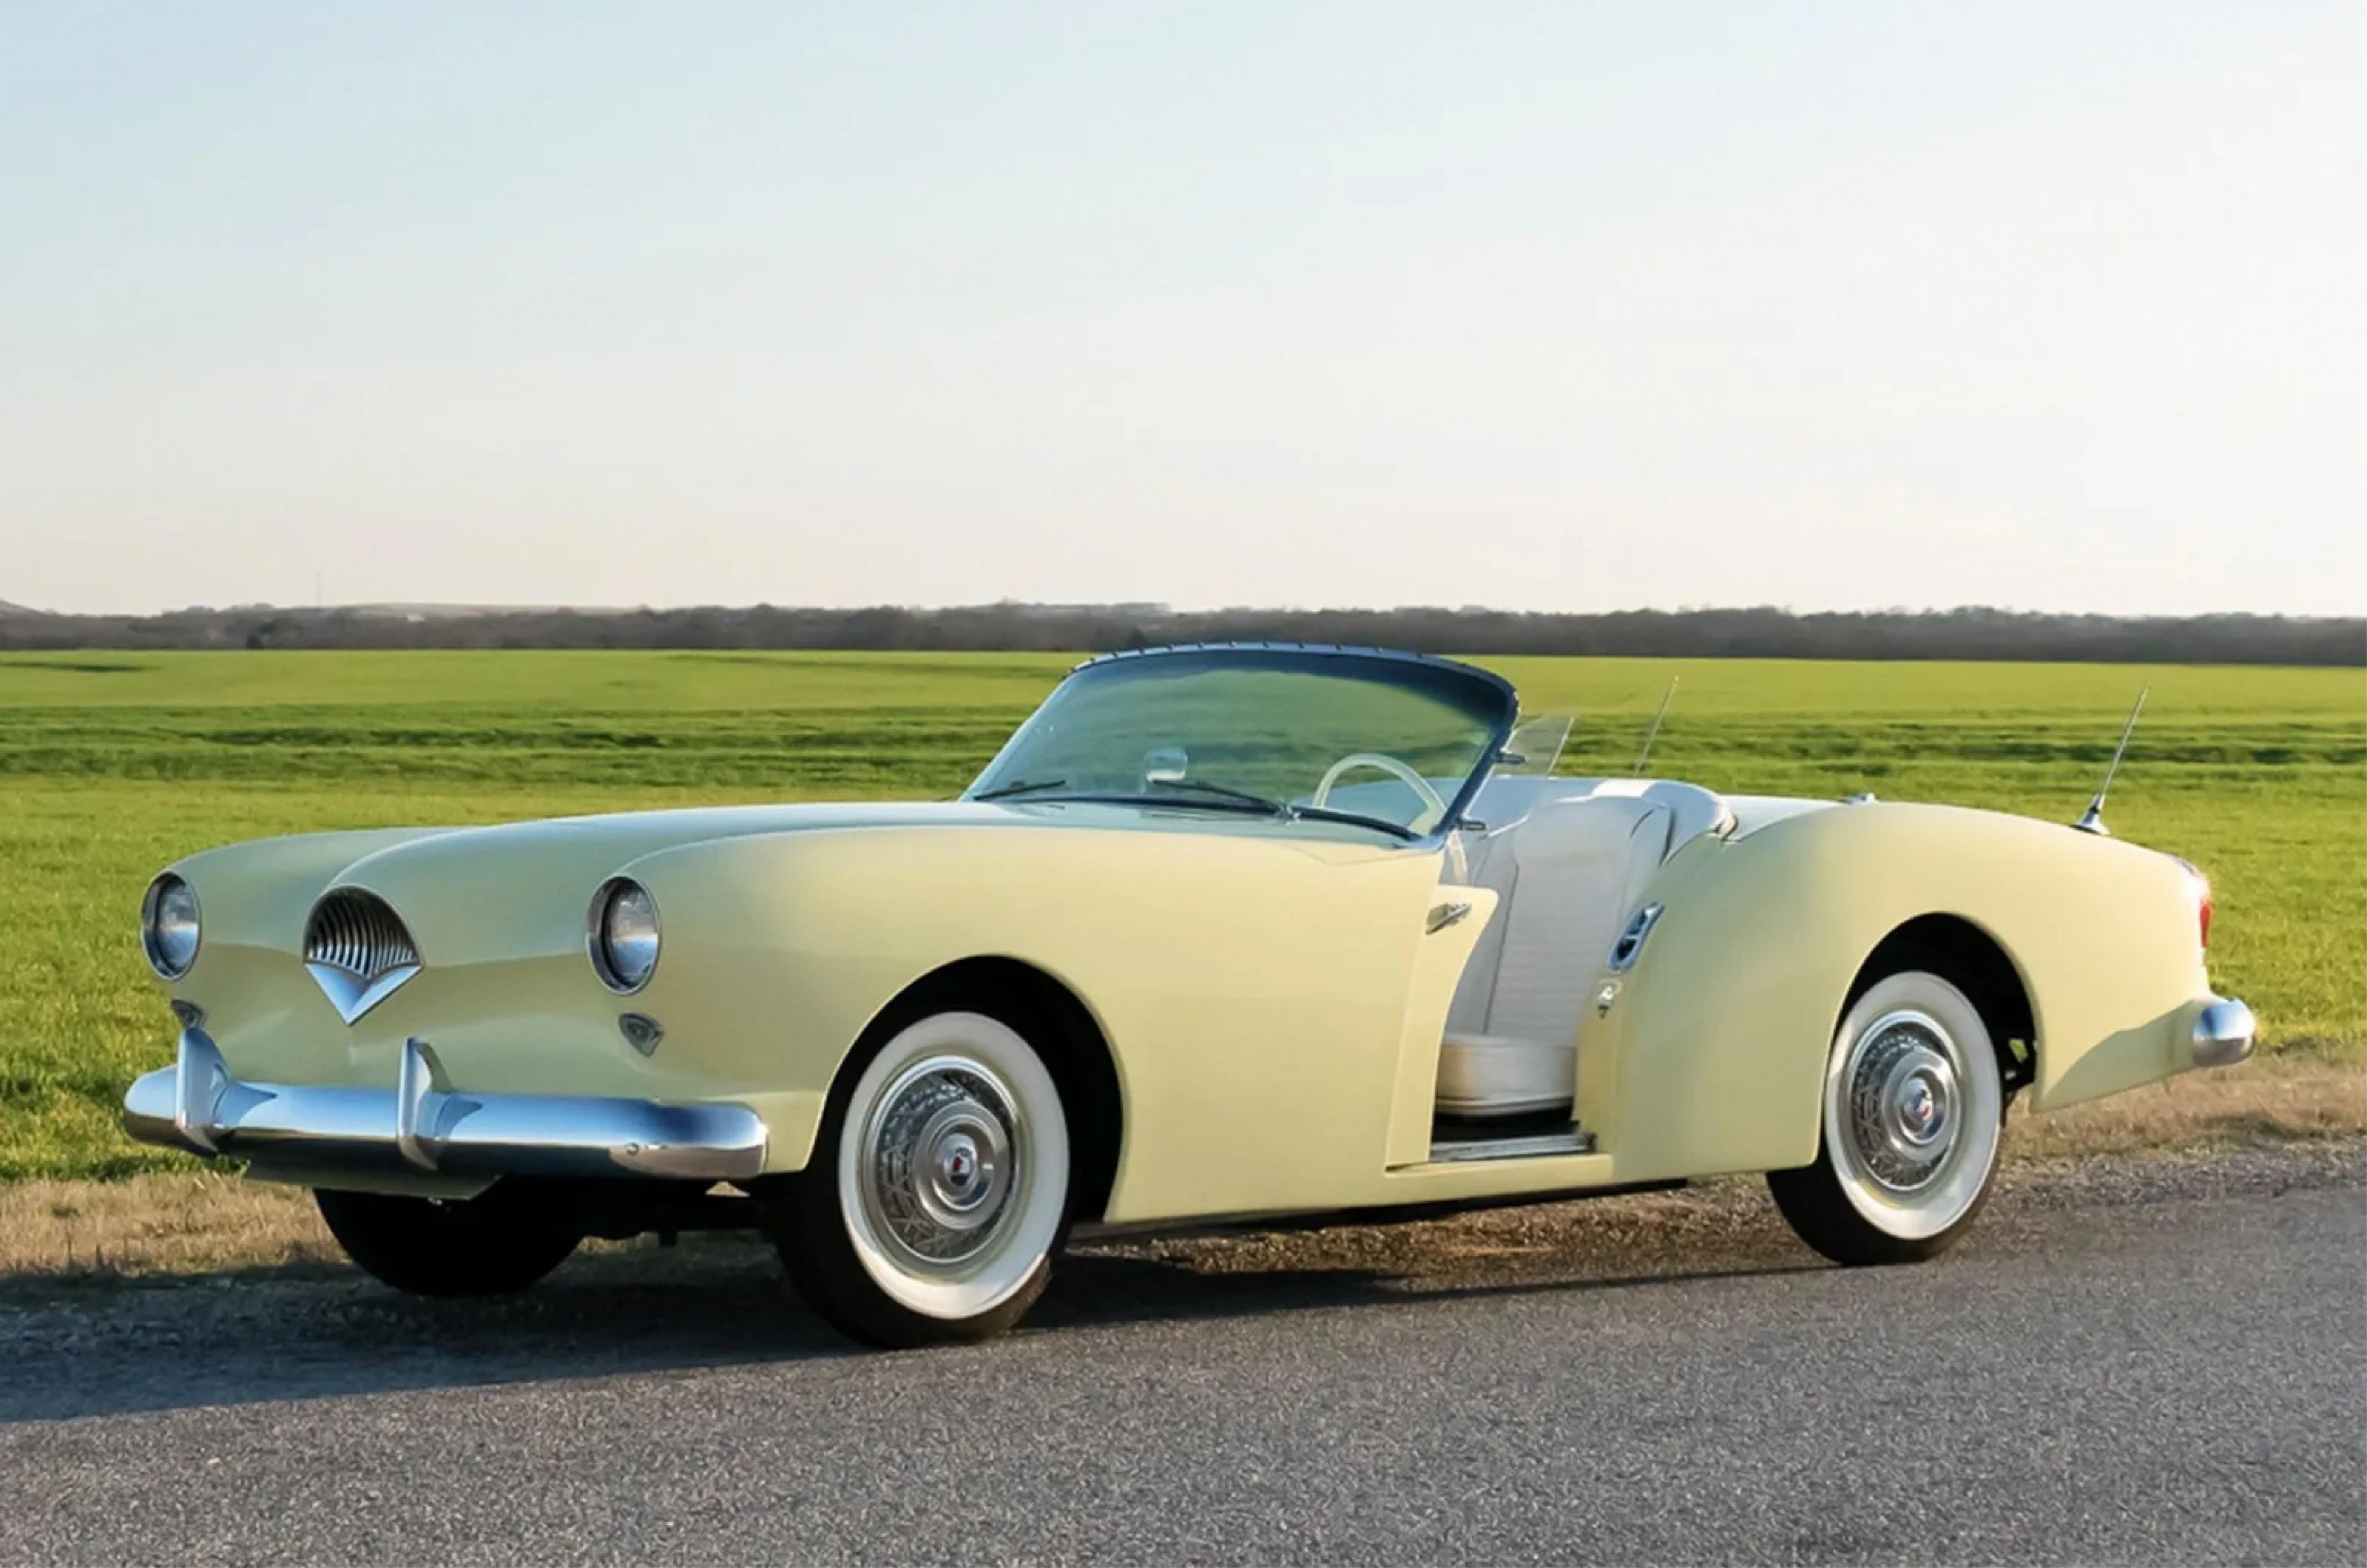 <p>Unlike some of the clunky sliding doors of this period, the Kaiser Darrin offered a sleek alternative to a standard hinged affair.</p>  <p>The fiberglass-bodied sports car had enough space built into the front fenders to hide the doors, while its occupants climbed in and out.</p>  <p>In the UK or Europe, it would be a challenge to find a car long enough to house a door behind the front wheel, however the American market was ideal for this.</p>  <p>Unfortunately, the Darrin’s sliding doors didn’t catch on – the idea relied on clean tracks and a well-maintained mechanism. Without this, owners would jump in and out over the doors, or leave them open all the time, even on the road.</p>